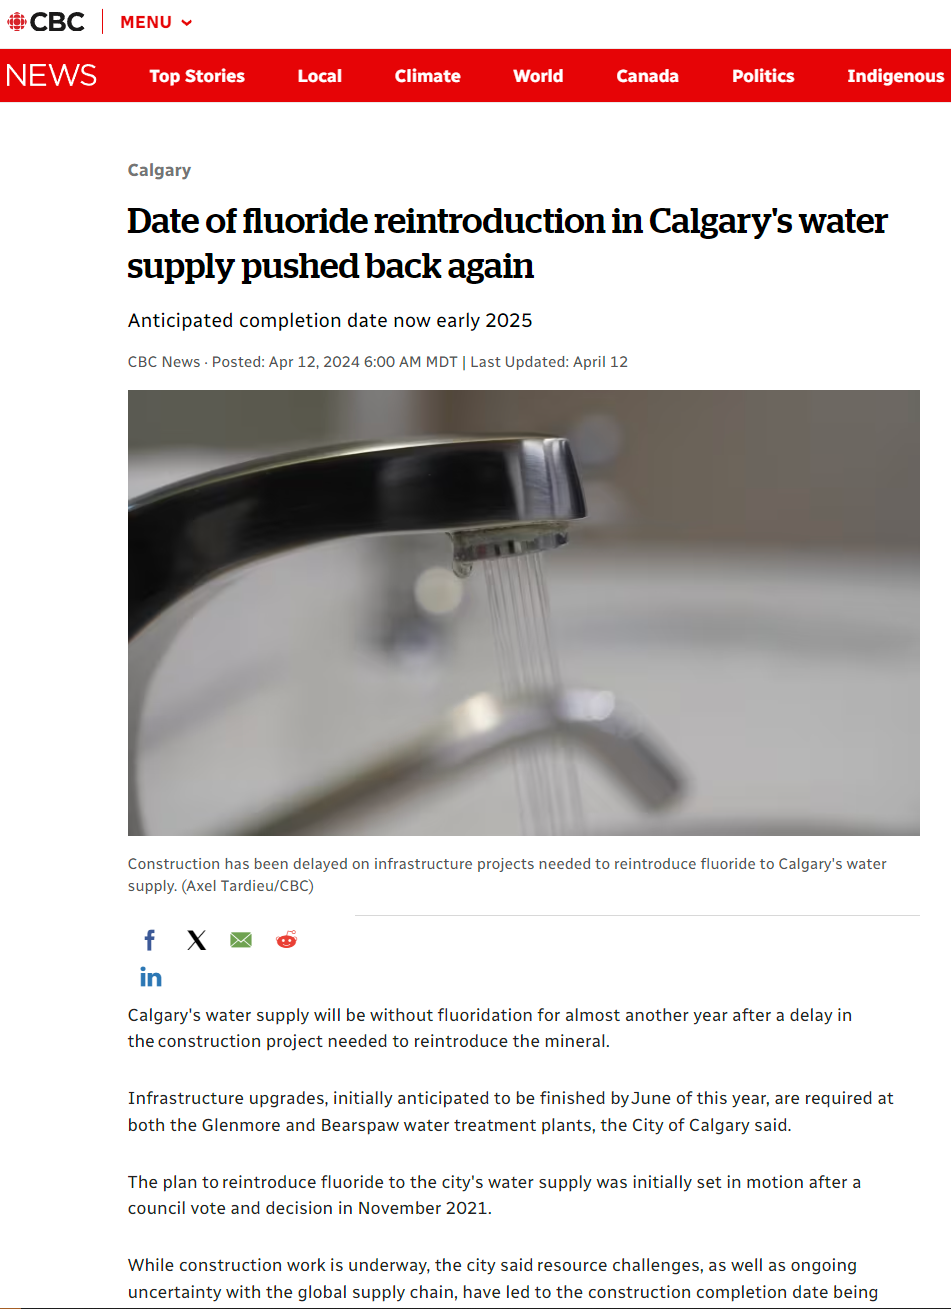 Date of fluoride reintroduction in Calgary’s water supply pushed back again [CBC News]